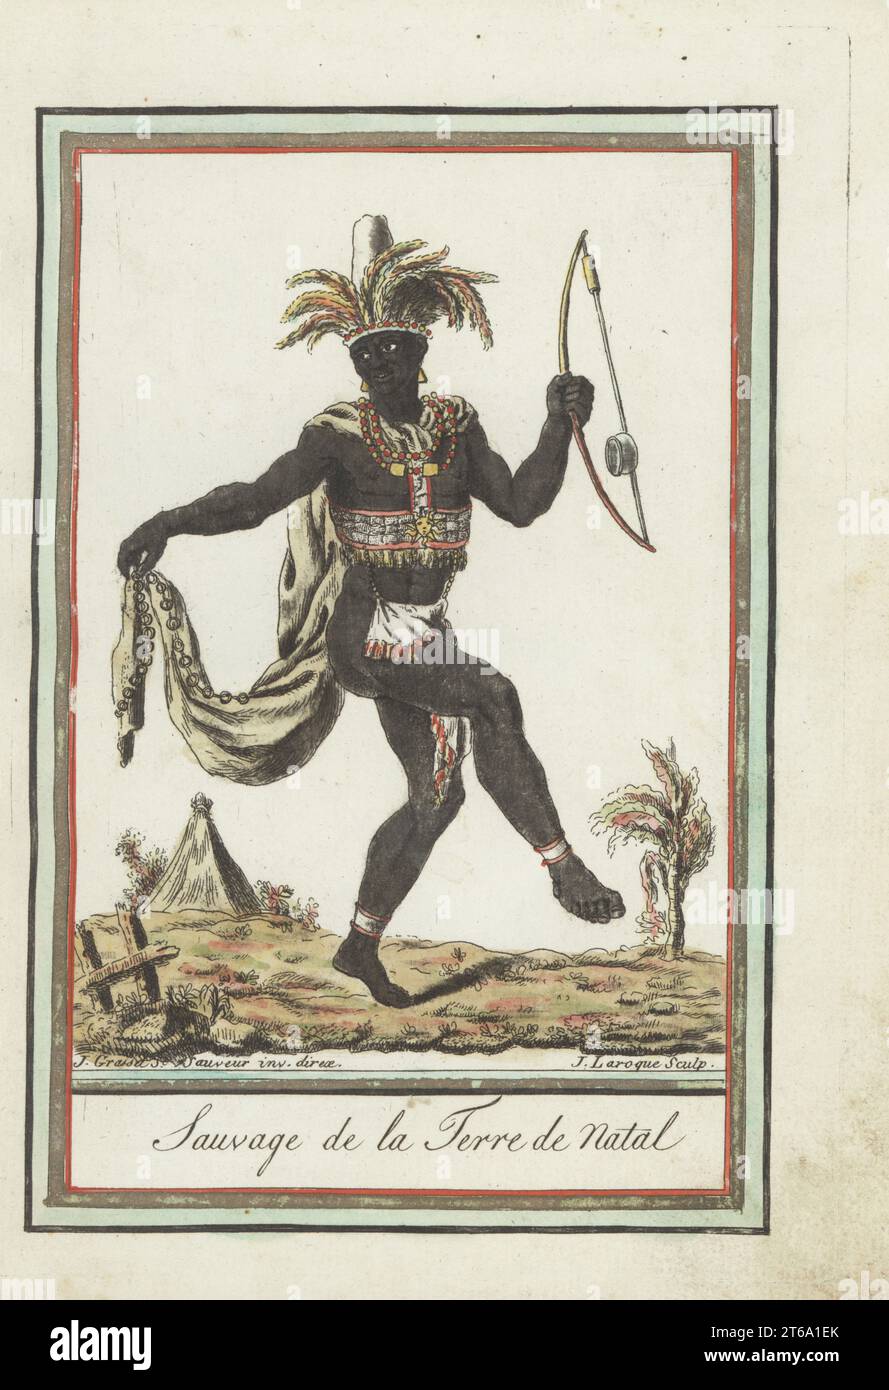 Zulu or Xhosa man of Natal, eastern South Africa. Dancing, wearing a feather headdress, long fringed cape, beaded chestplate and apron, holding a single-string gourd bow, uhadi or ugubhu. Sauvage de la Terre de Natal. Handcoloured copperplate engraving by J. Laroque after a design by Jacques Grasset de Saint-Sauveur from his Encyclopedie des voyages, Encyclopedia of Voyages, Bordeaux, France, 1792. Stock Photo